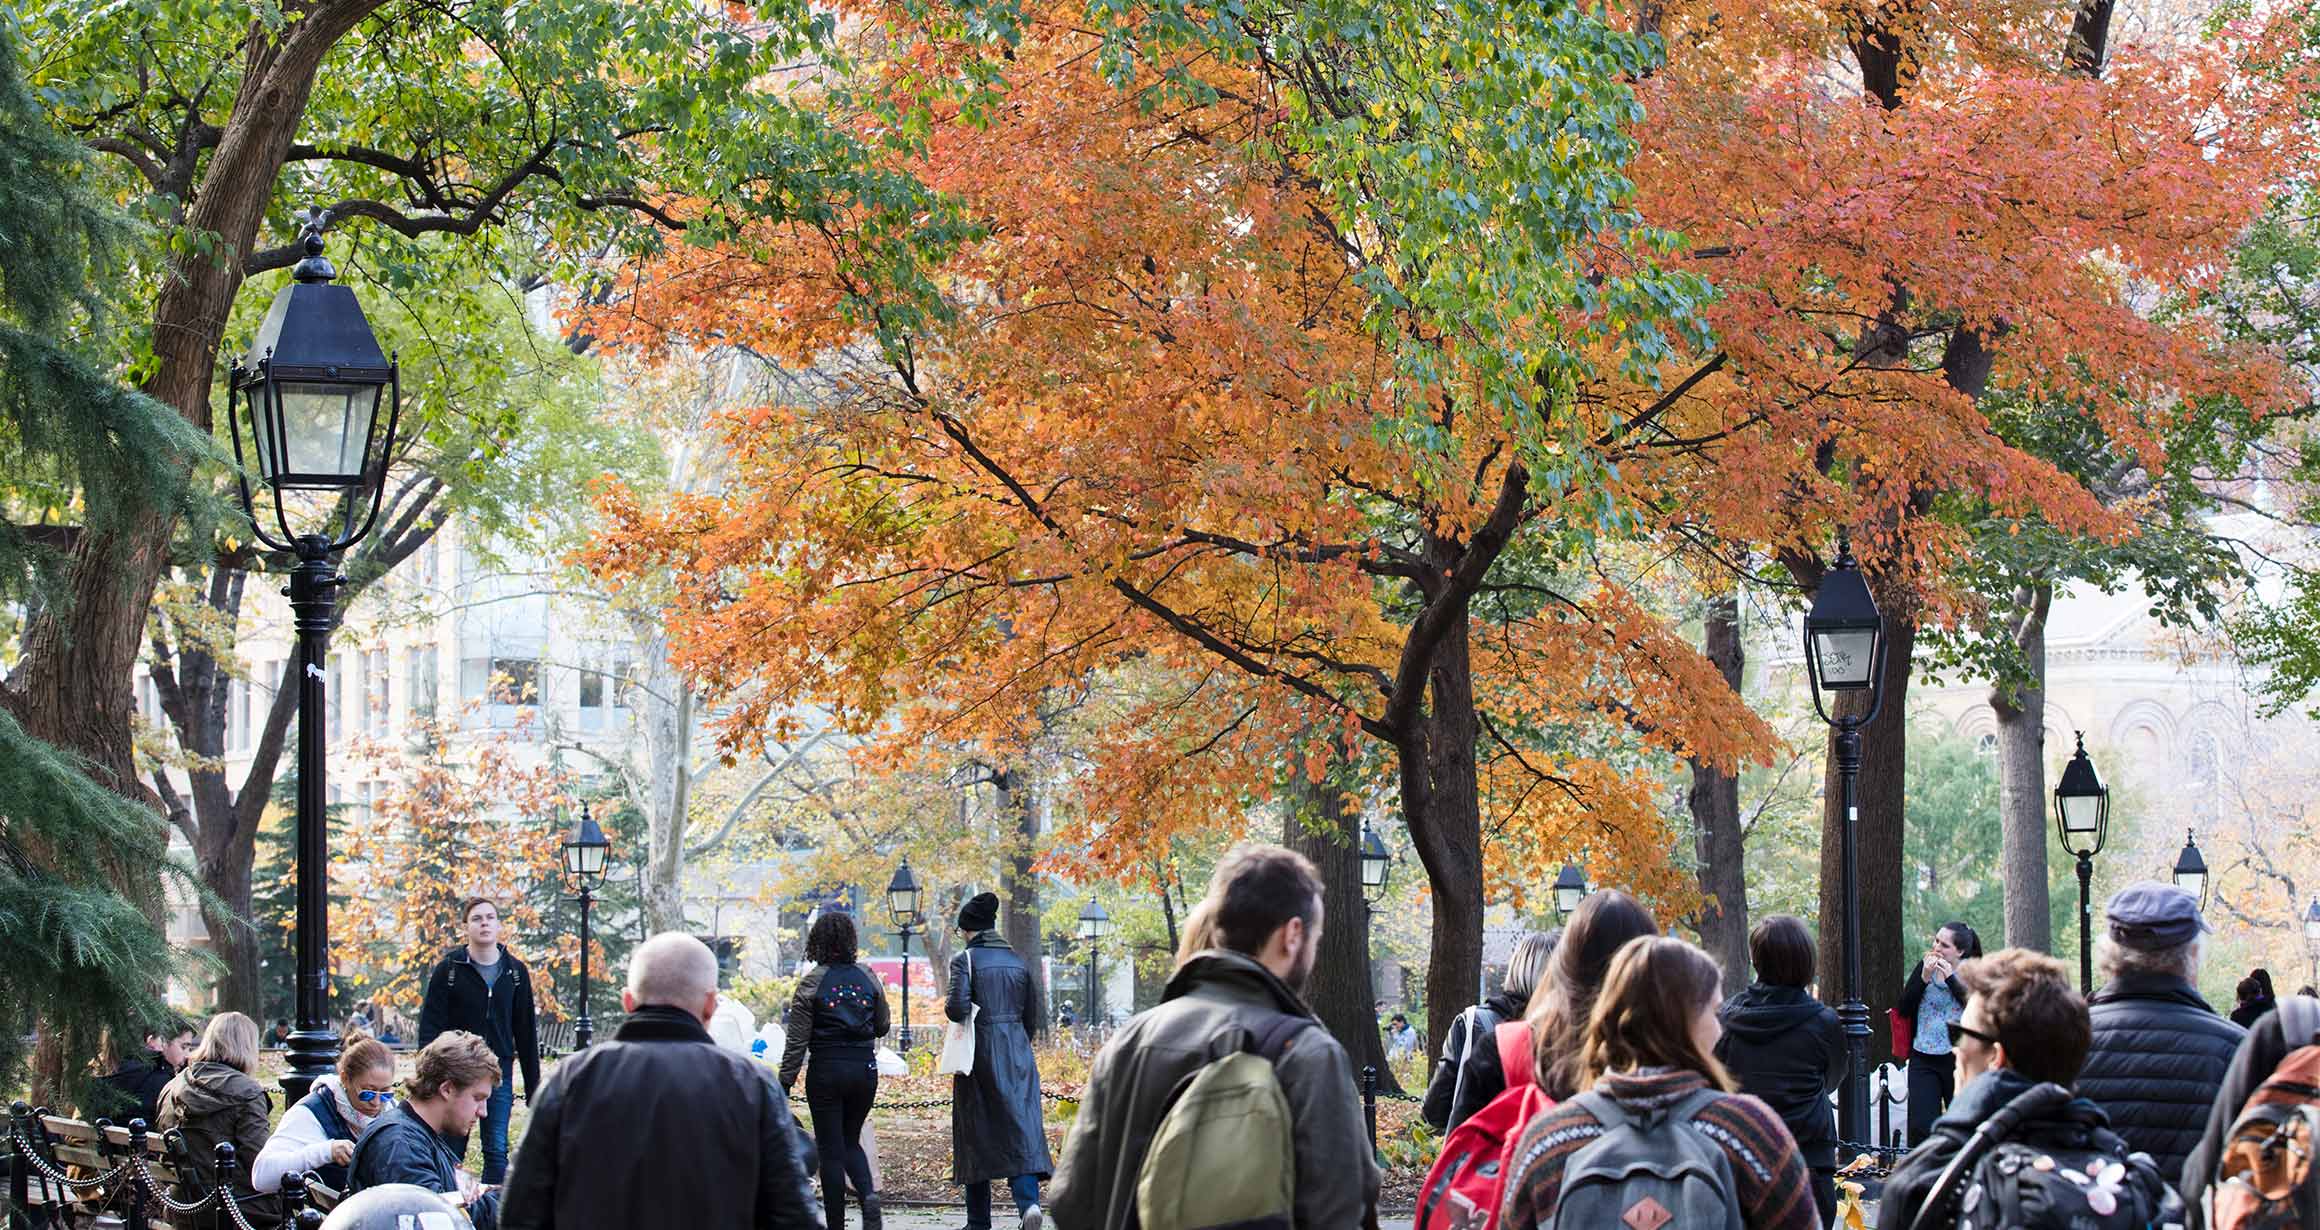 A Fall scene in Washington Square Park with the leaves bright orange